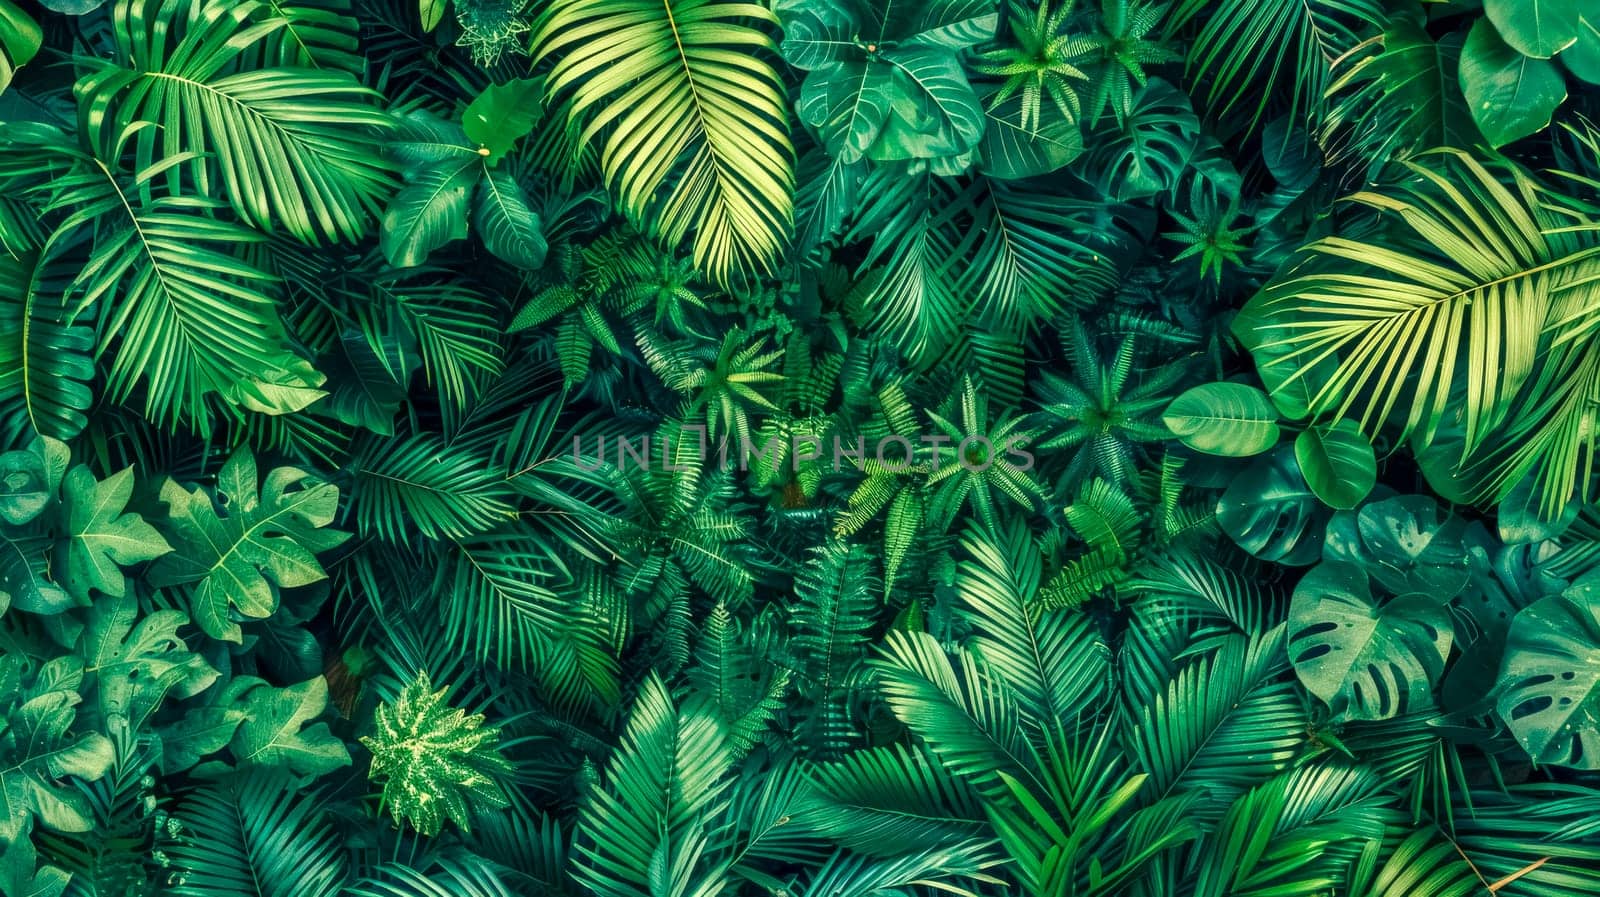 Lush tropical green leaf texture with vibrant monstera and palm foliage. Creating a natural botanical pattern in a dense rainforest environment